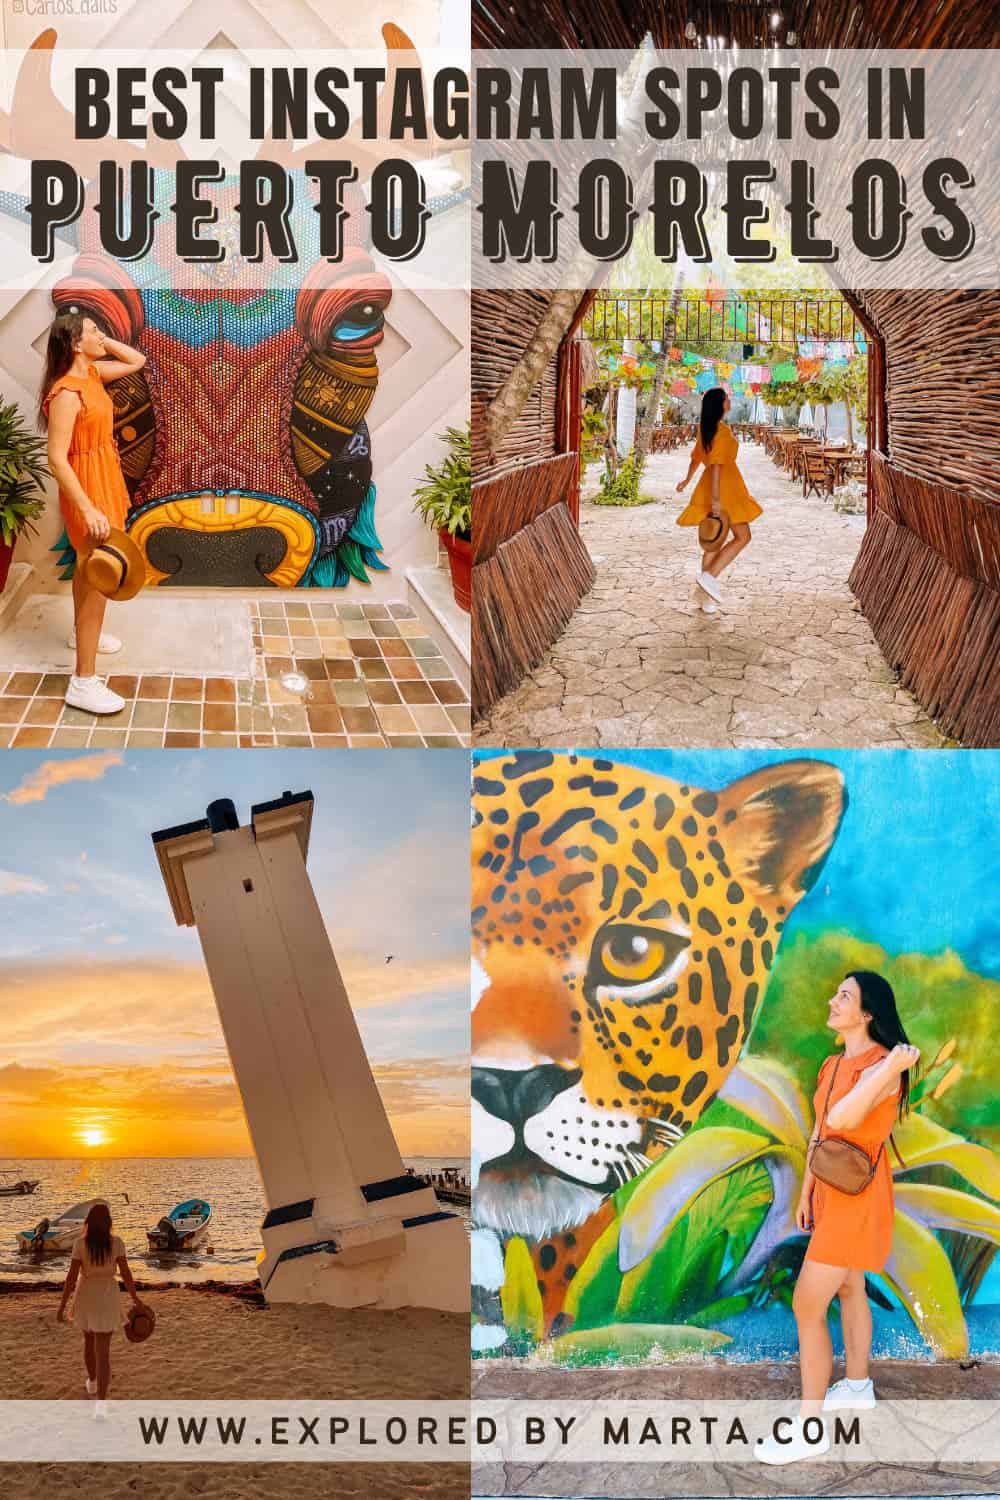 Awesome Instagram spots in Puerto Morelos in Mexico